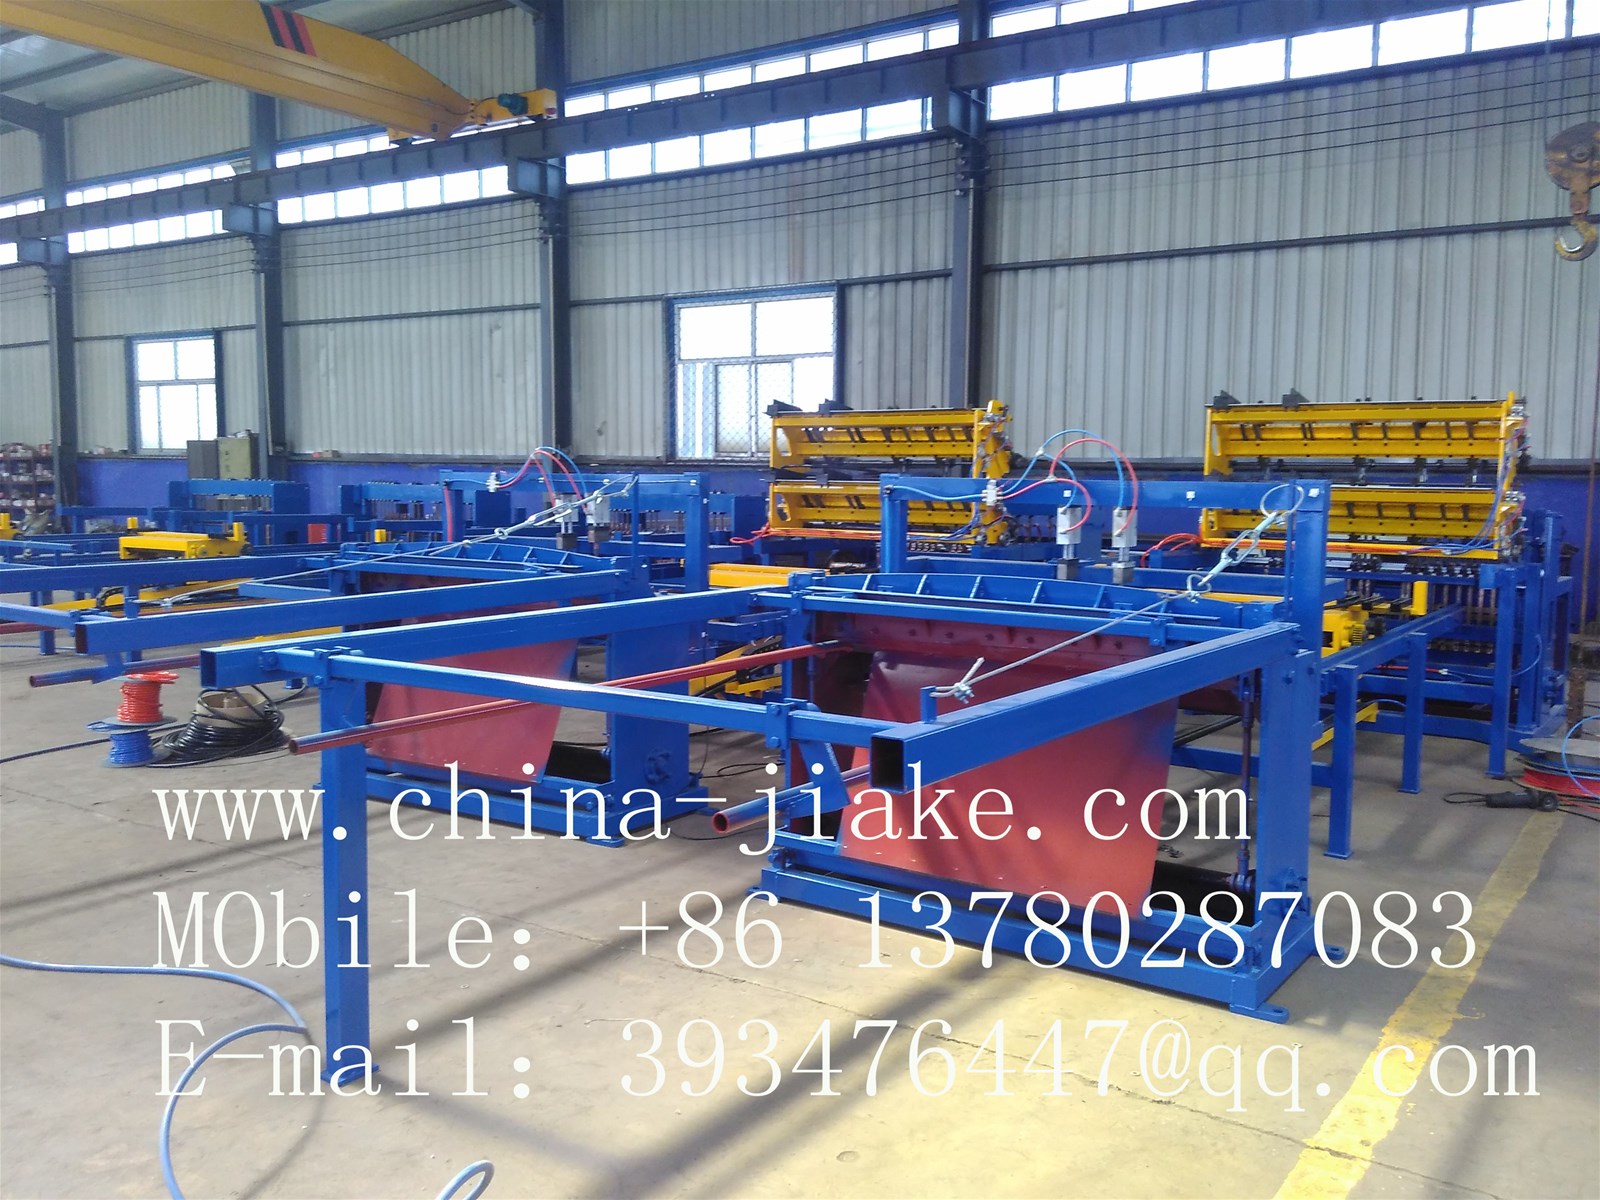 Full Automatic Wire Mesh Welding Machines for making Poultry Chicken Cage MeshJKAC1200S